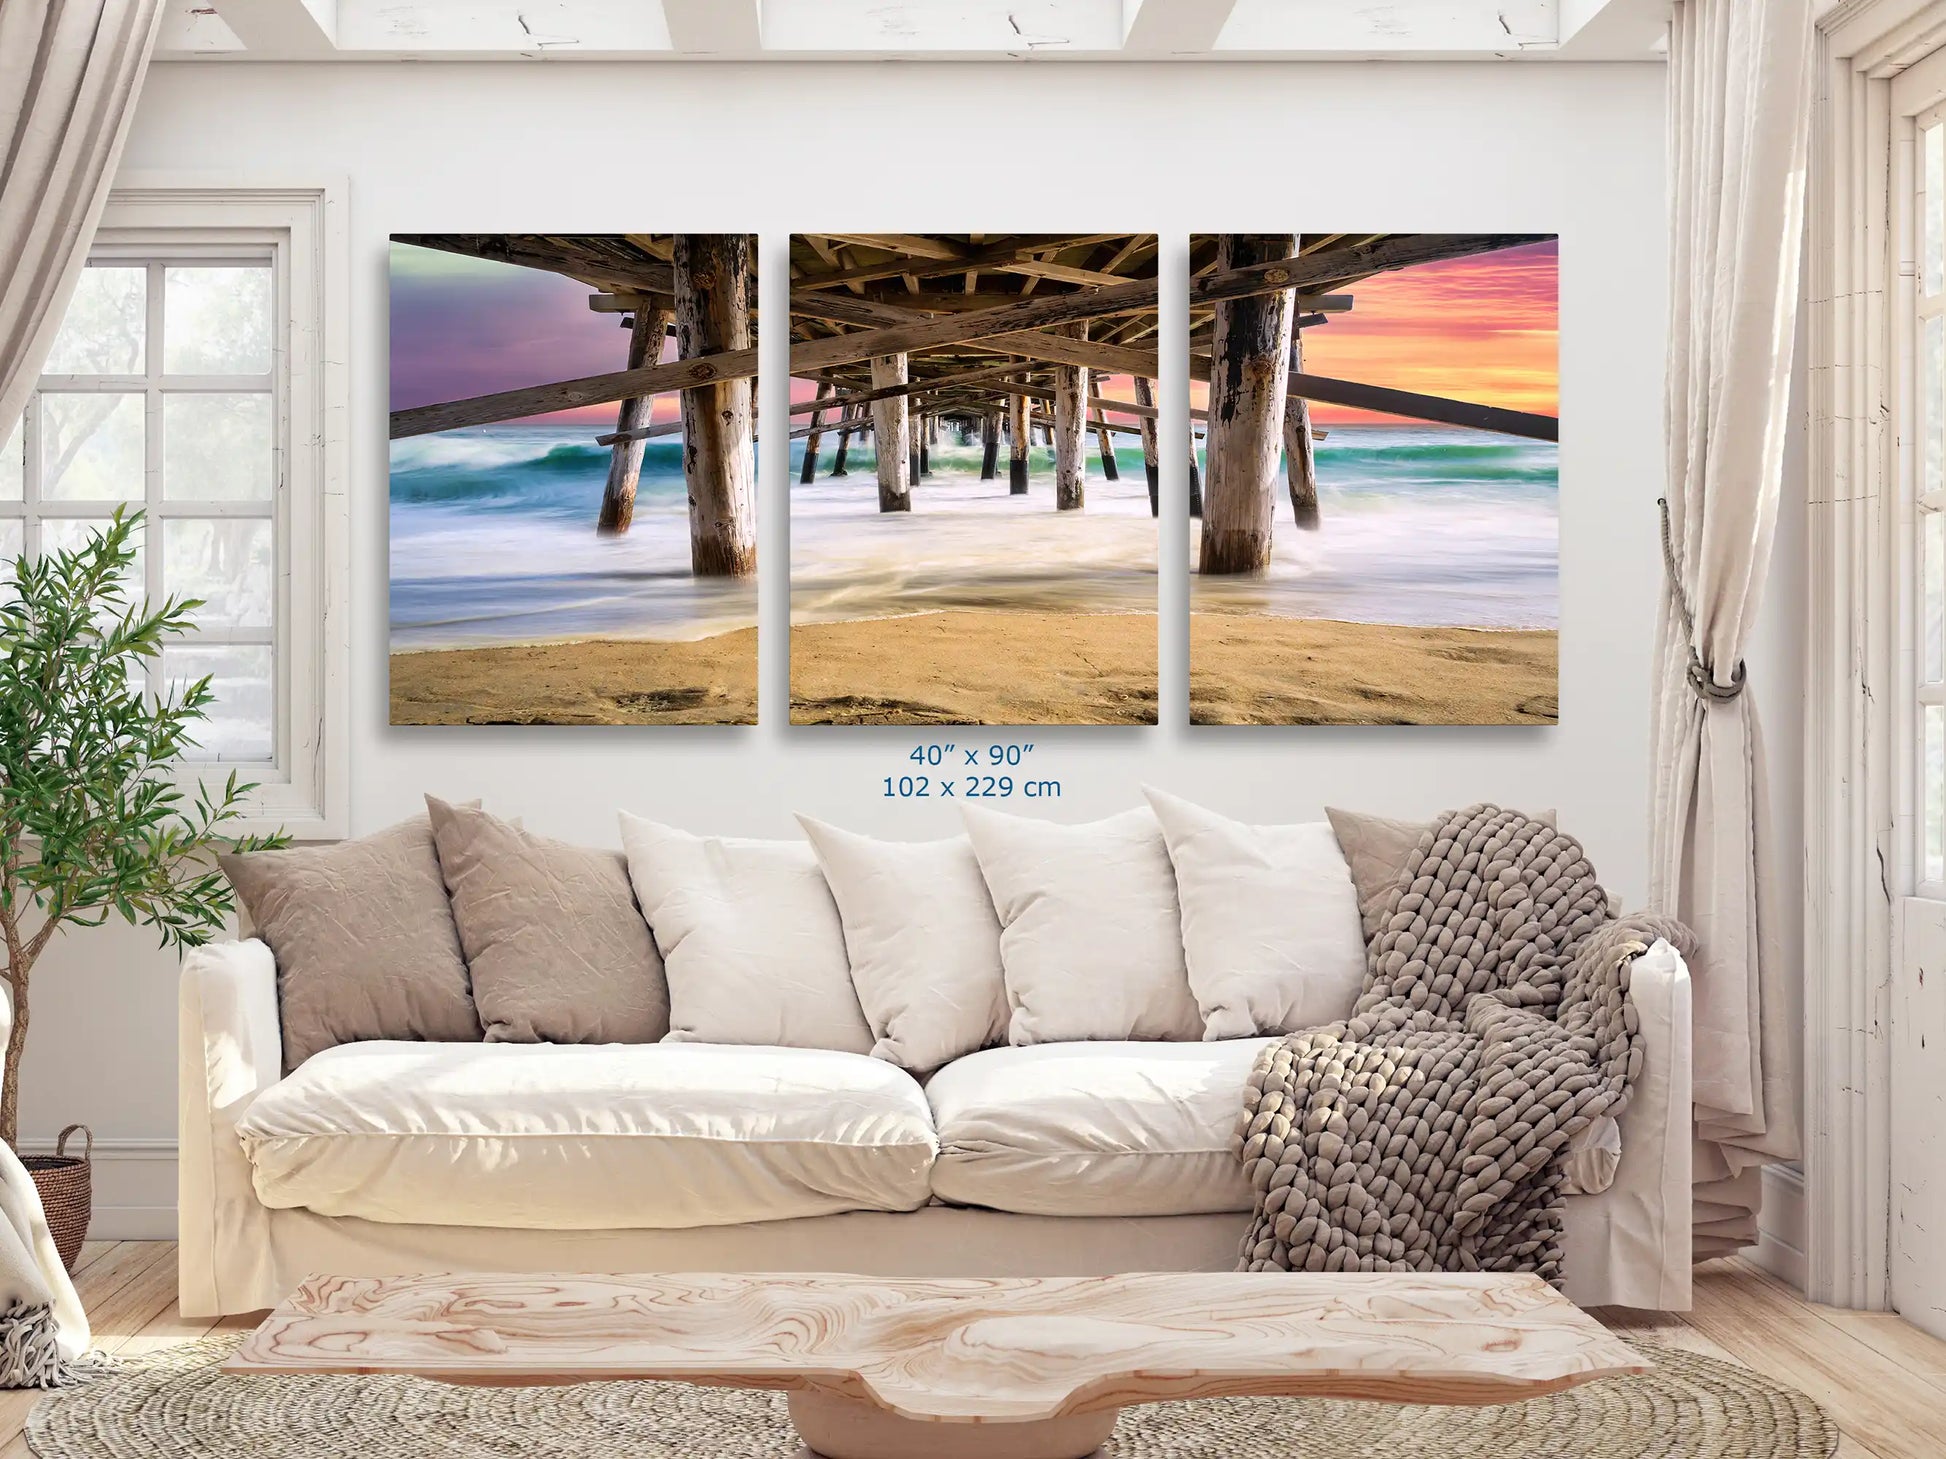 Majestic 40x90 canvas wall art of Balboa Pier at sunset in a living room, enveloping the viewer in coastal tranquility.